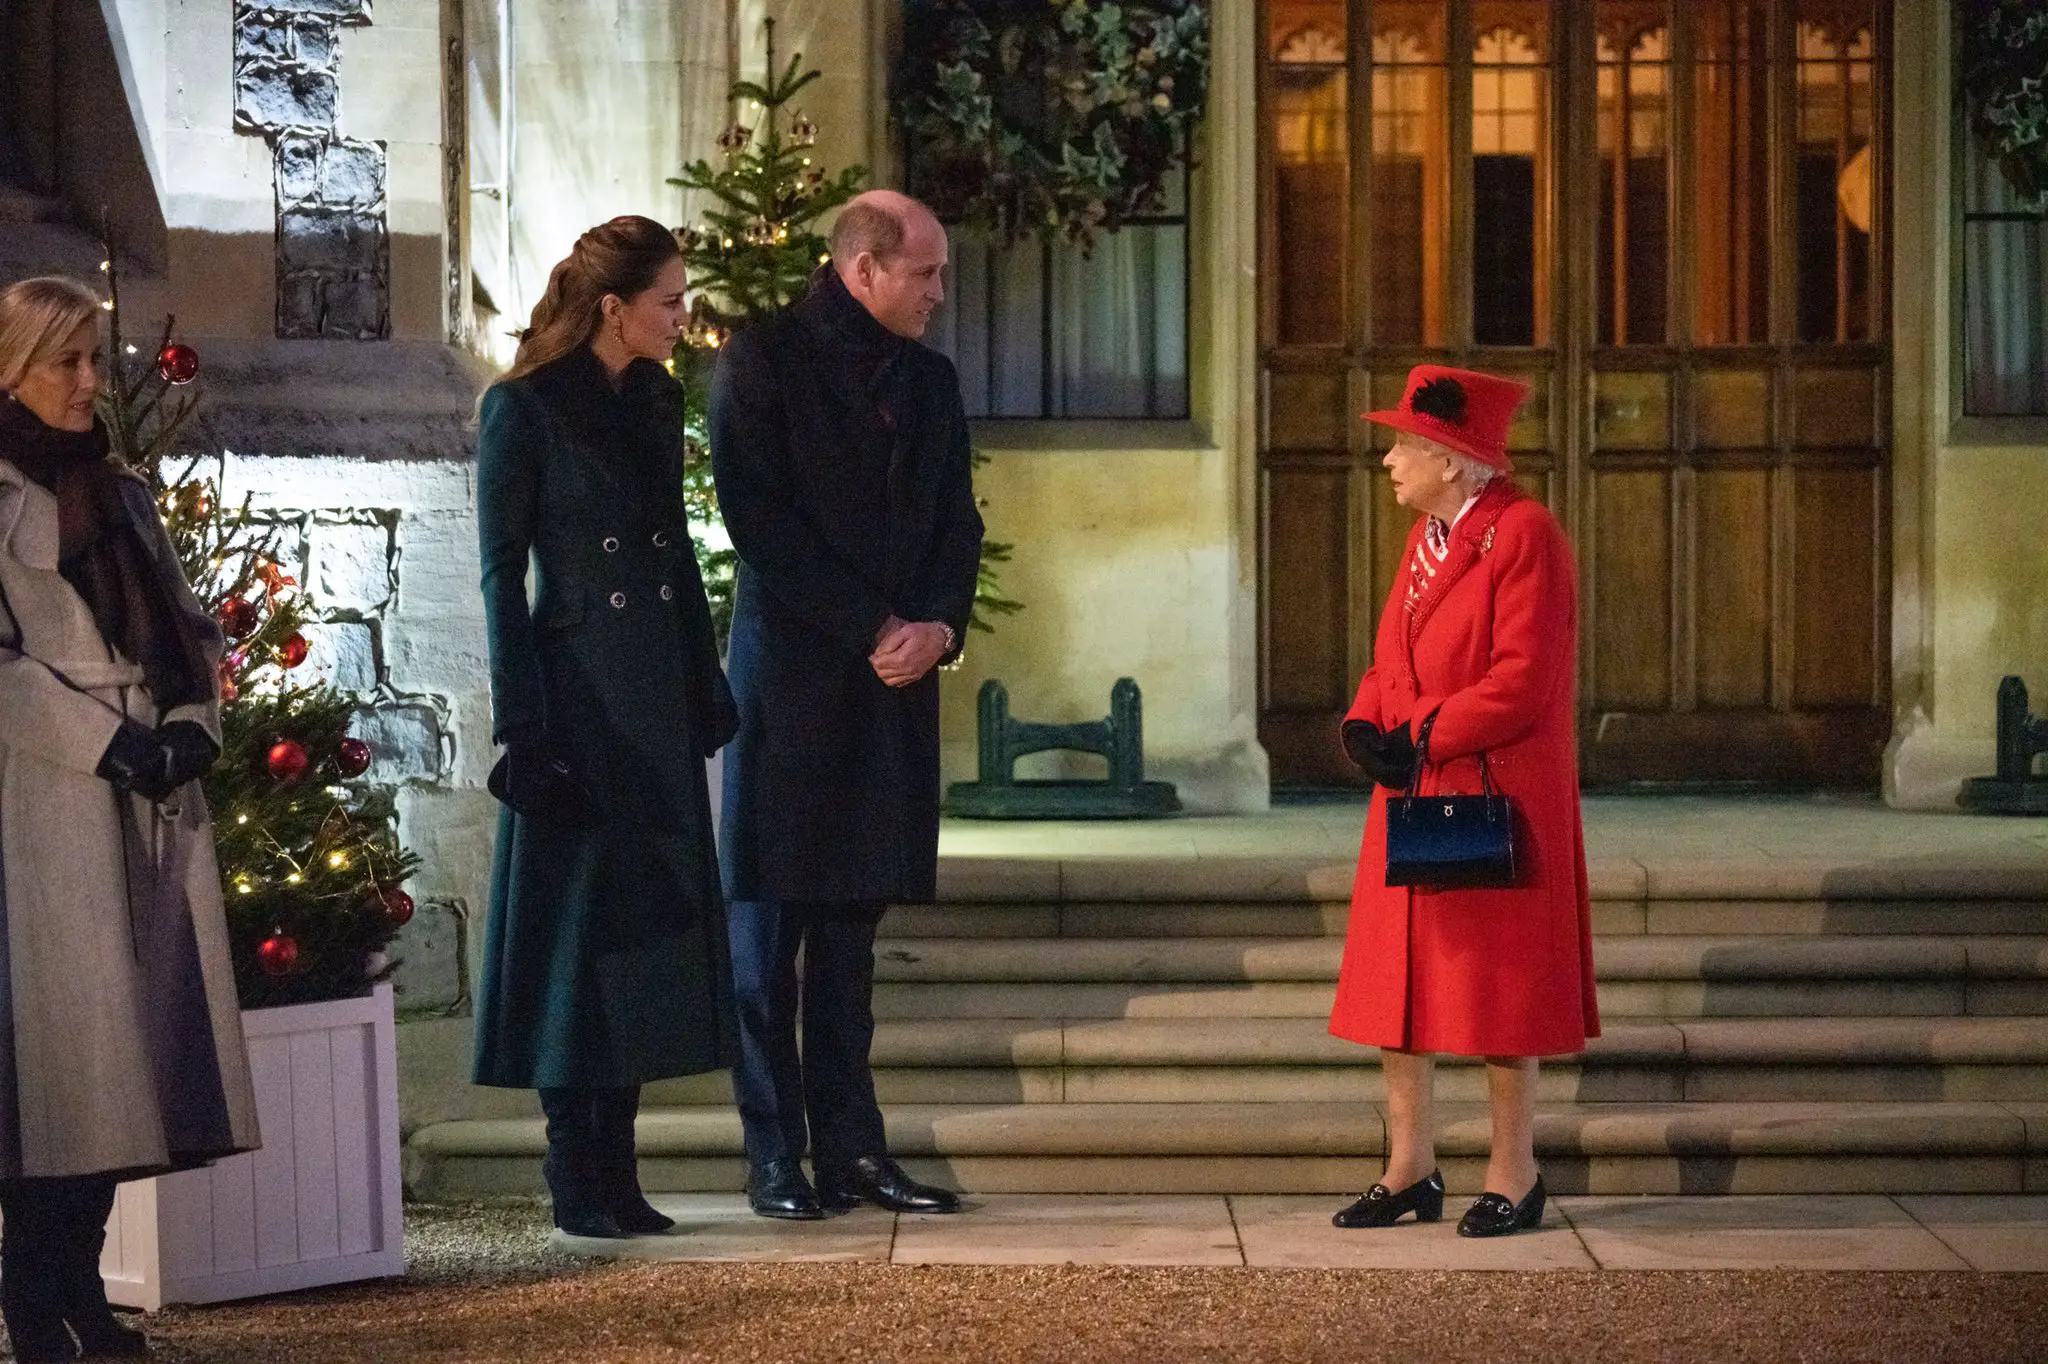 At the end of the Royal Train Tour, The Duke and Duchess of Cambridge met with The Queen and Senior Members of Royal Famiily before Christmas